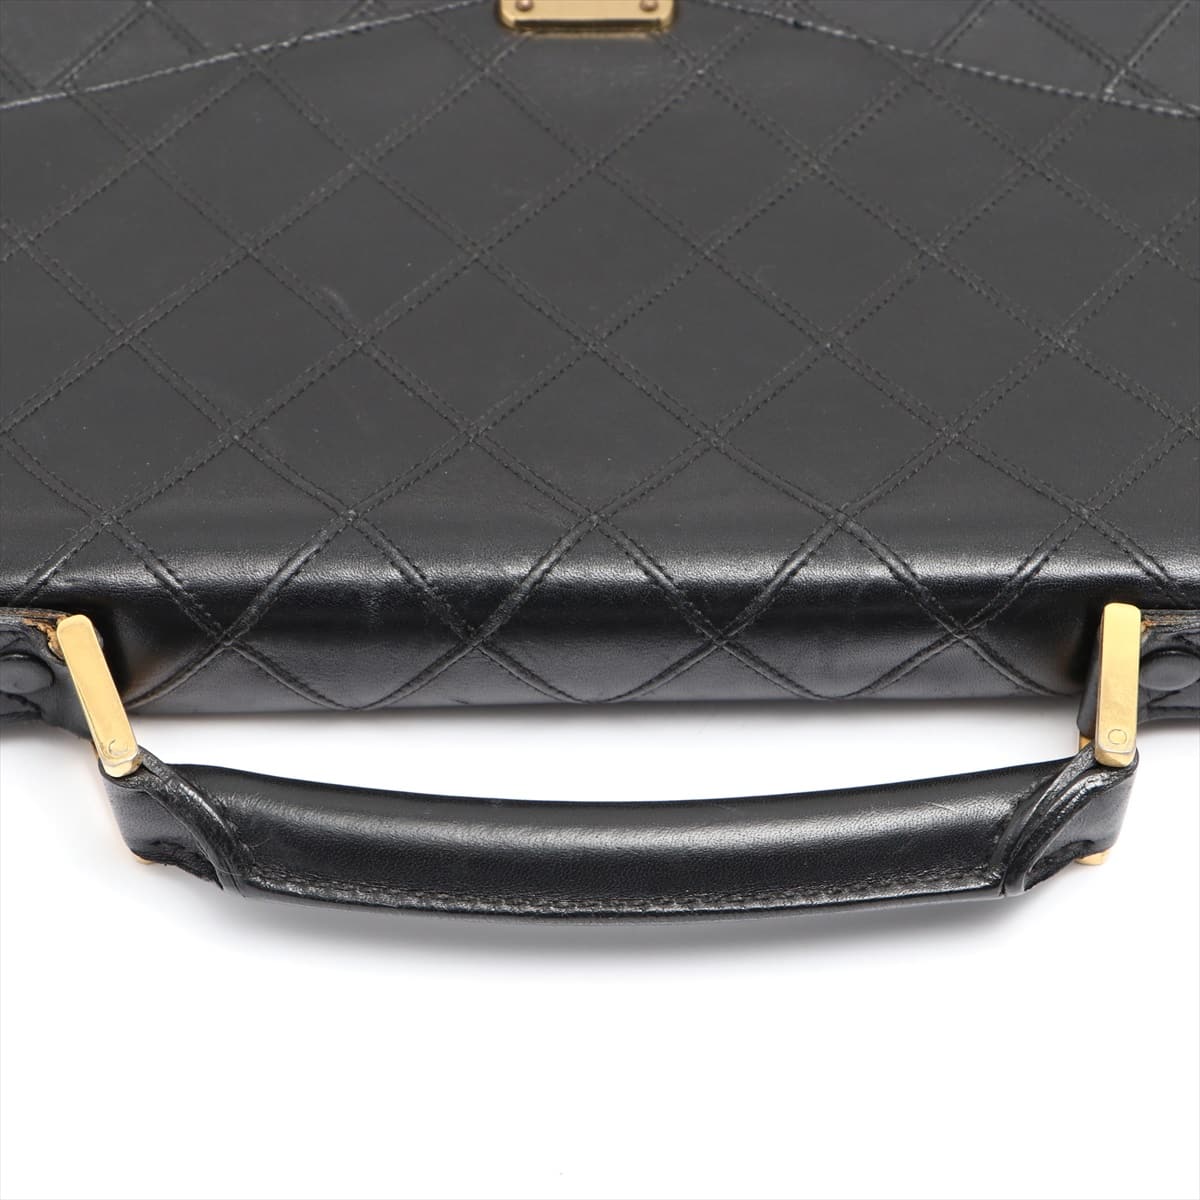 Chanel Bicolore Lambskin Business bag Black Gold Metal fittings 1XXXXXX